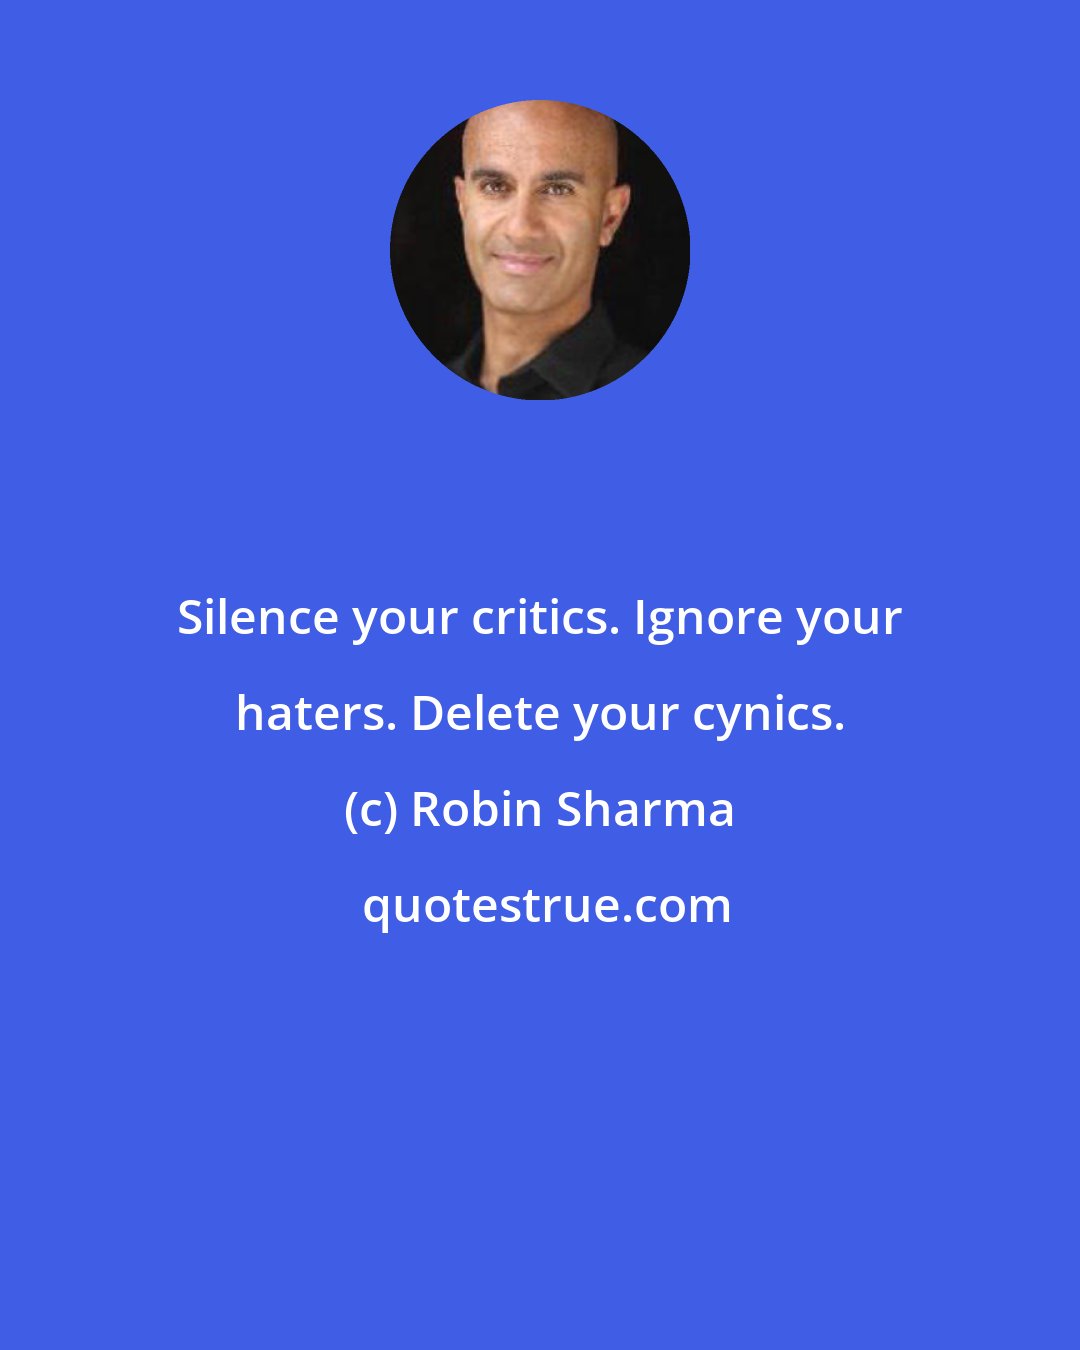 Robin Sharma: Silence your critics. Ignore your haters. Delete your cynics.